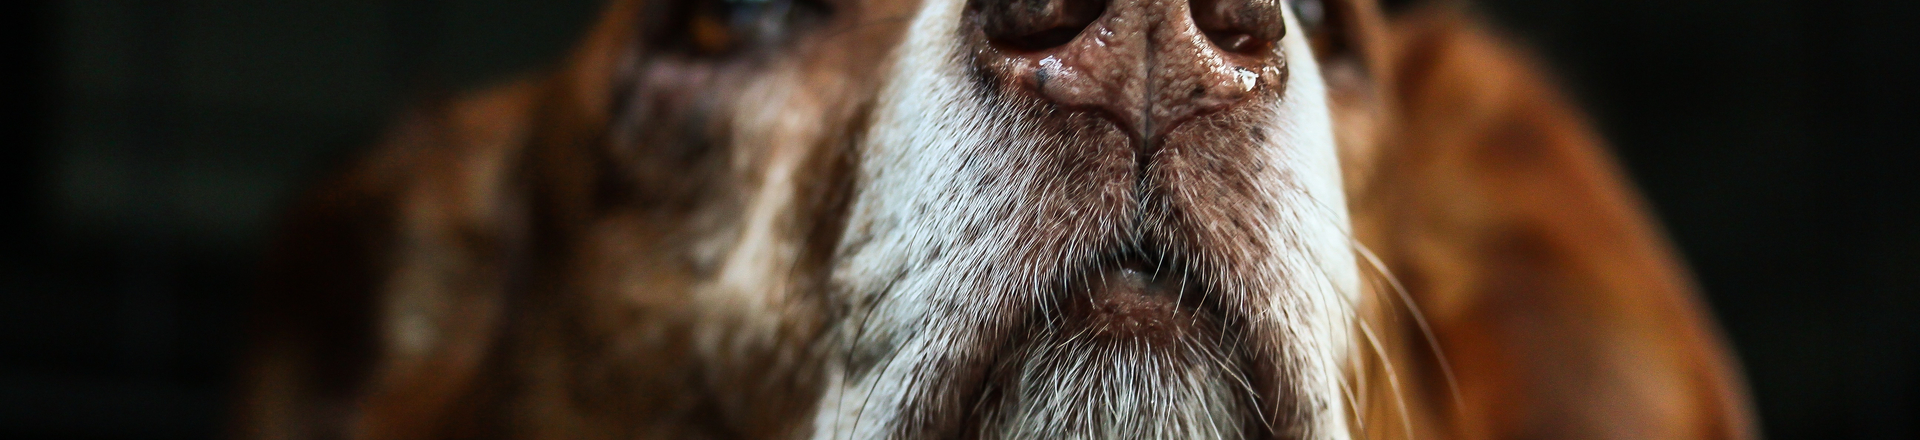 Canva   close up photography of short coated brown and white dog